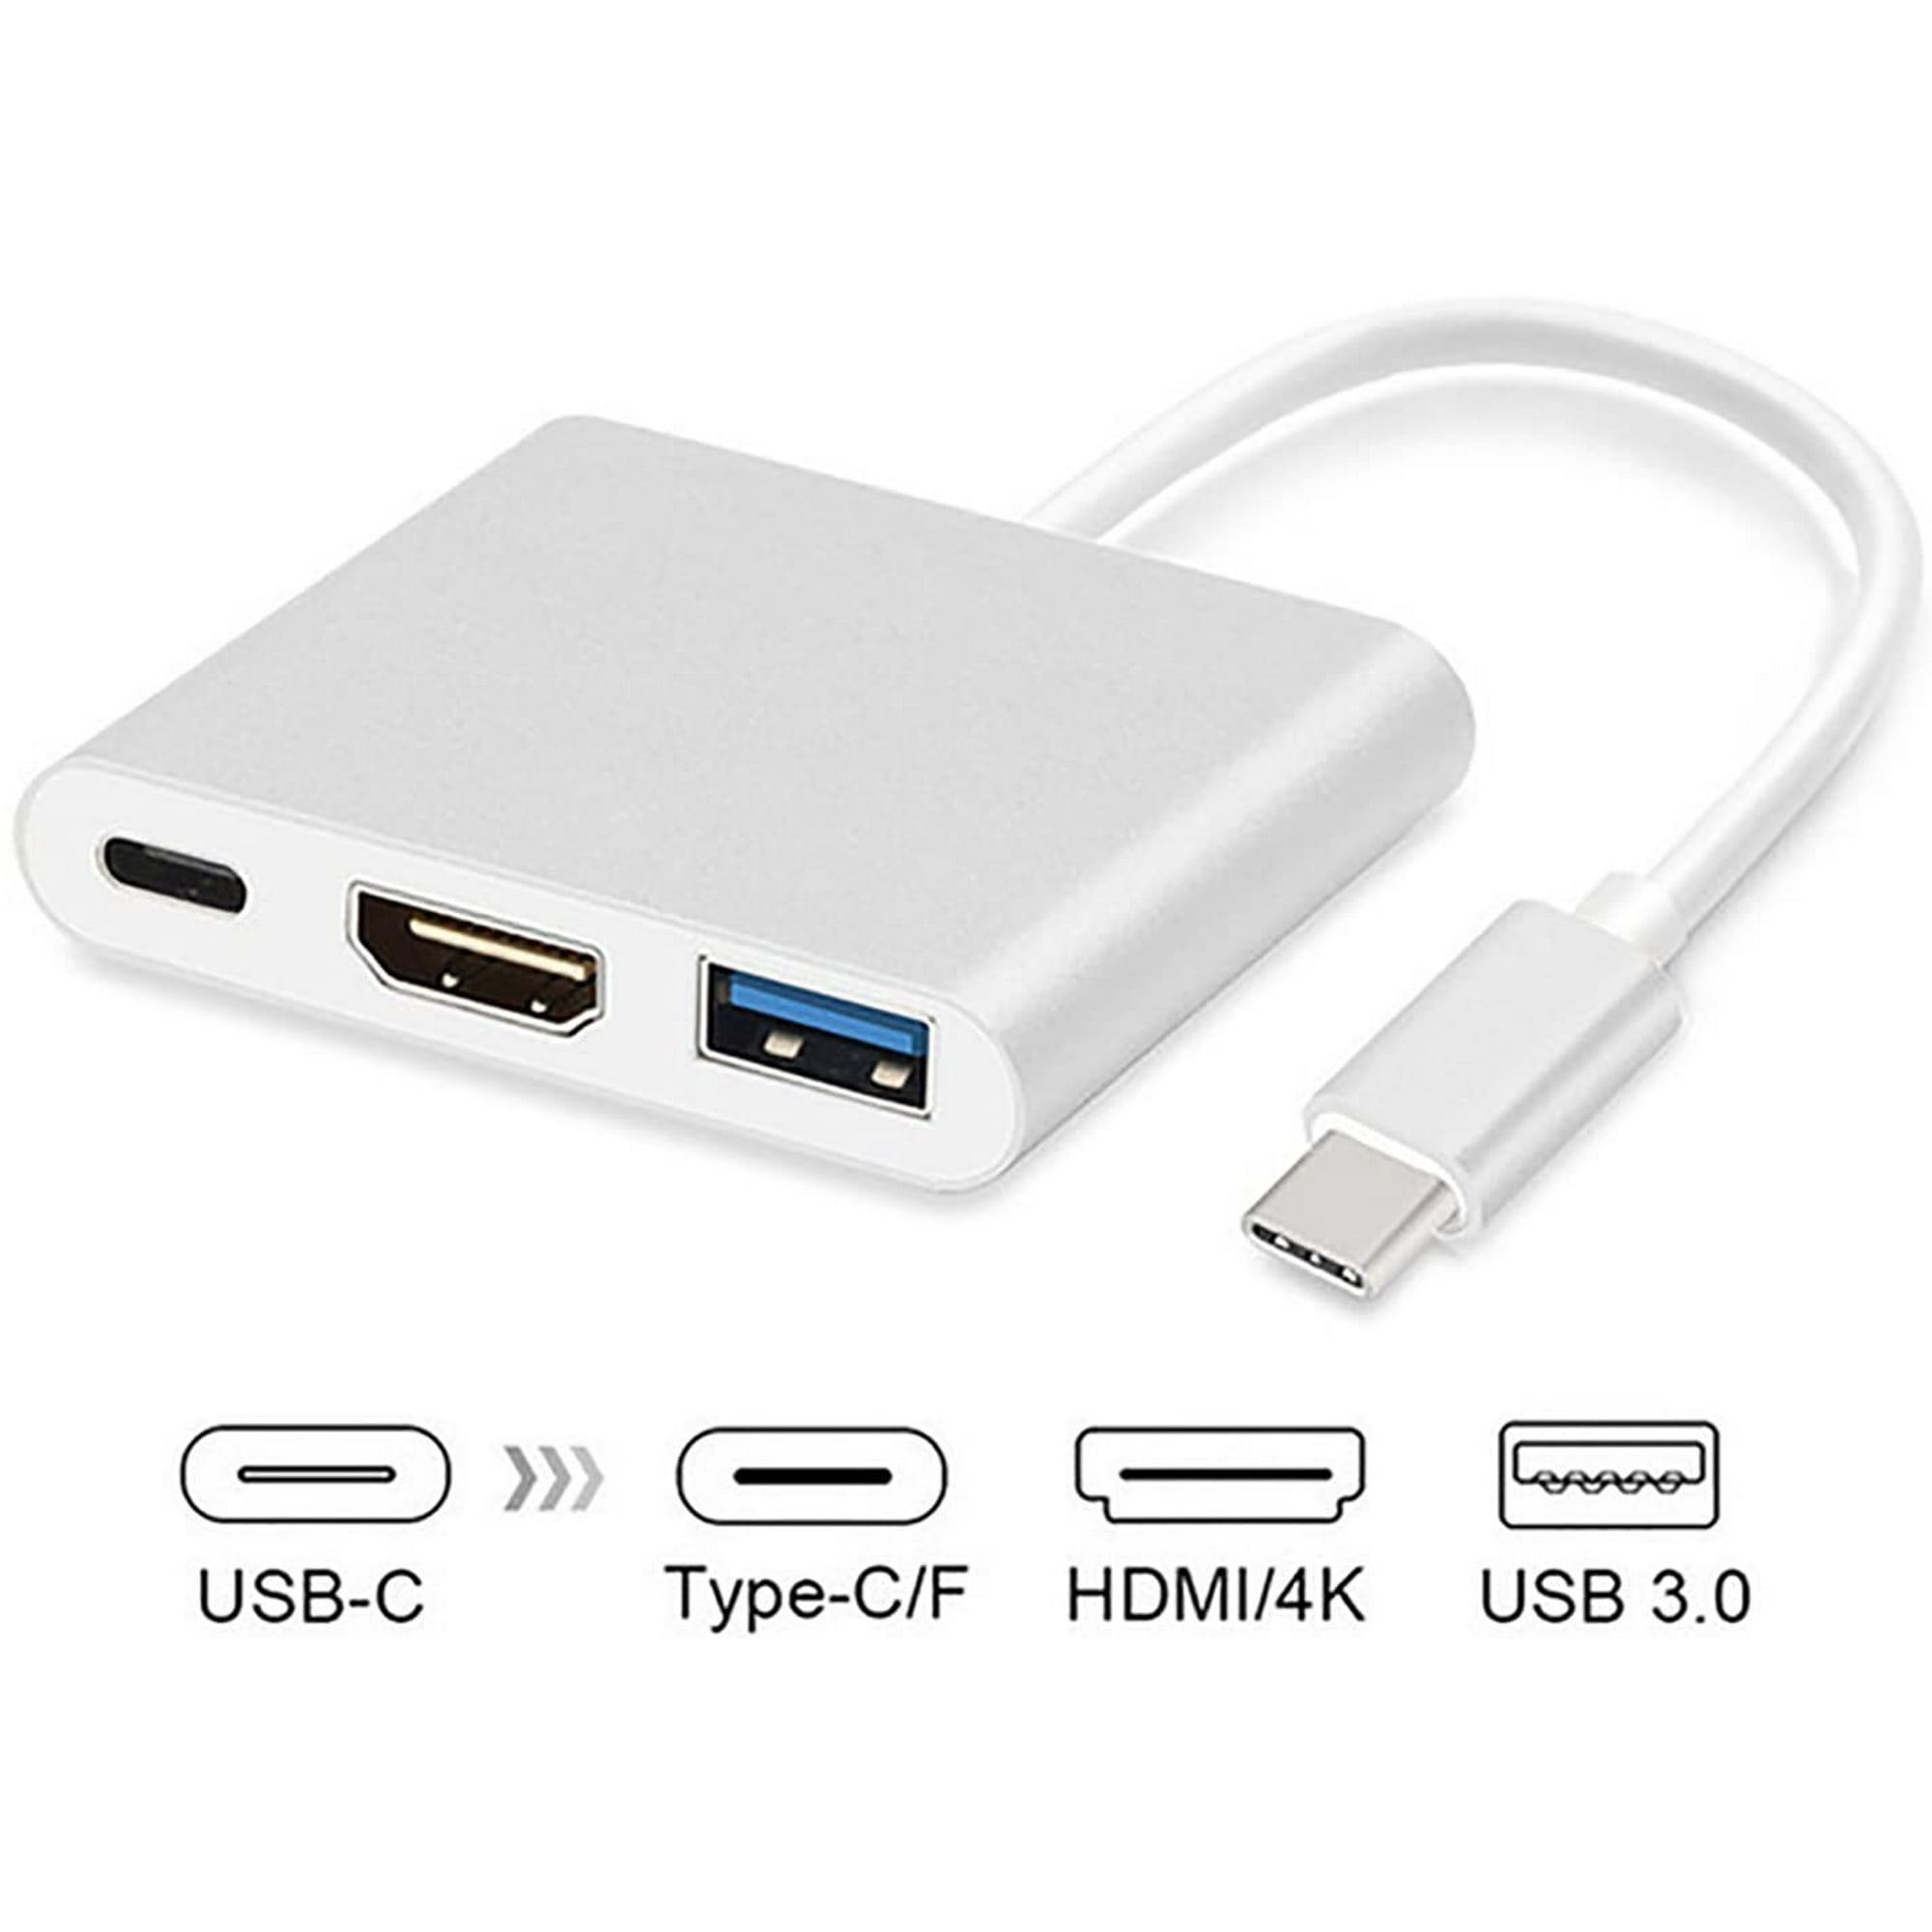 Terminal diskret vare USB-C to HDMI Adapter (Supports 4K / 60Hz) - Type- C 3 in 1 Converter Cable  for 2017/2016 MacBook Pro, MacBook, Mac | Walmart Canada